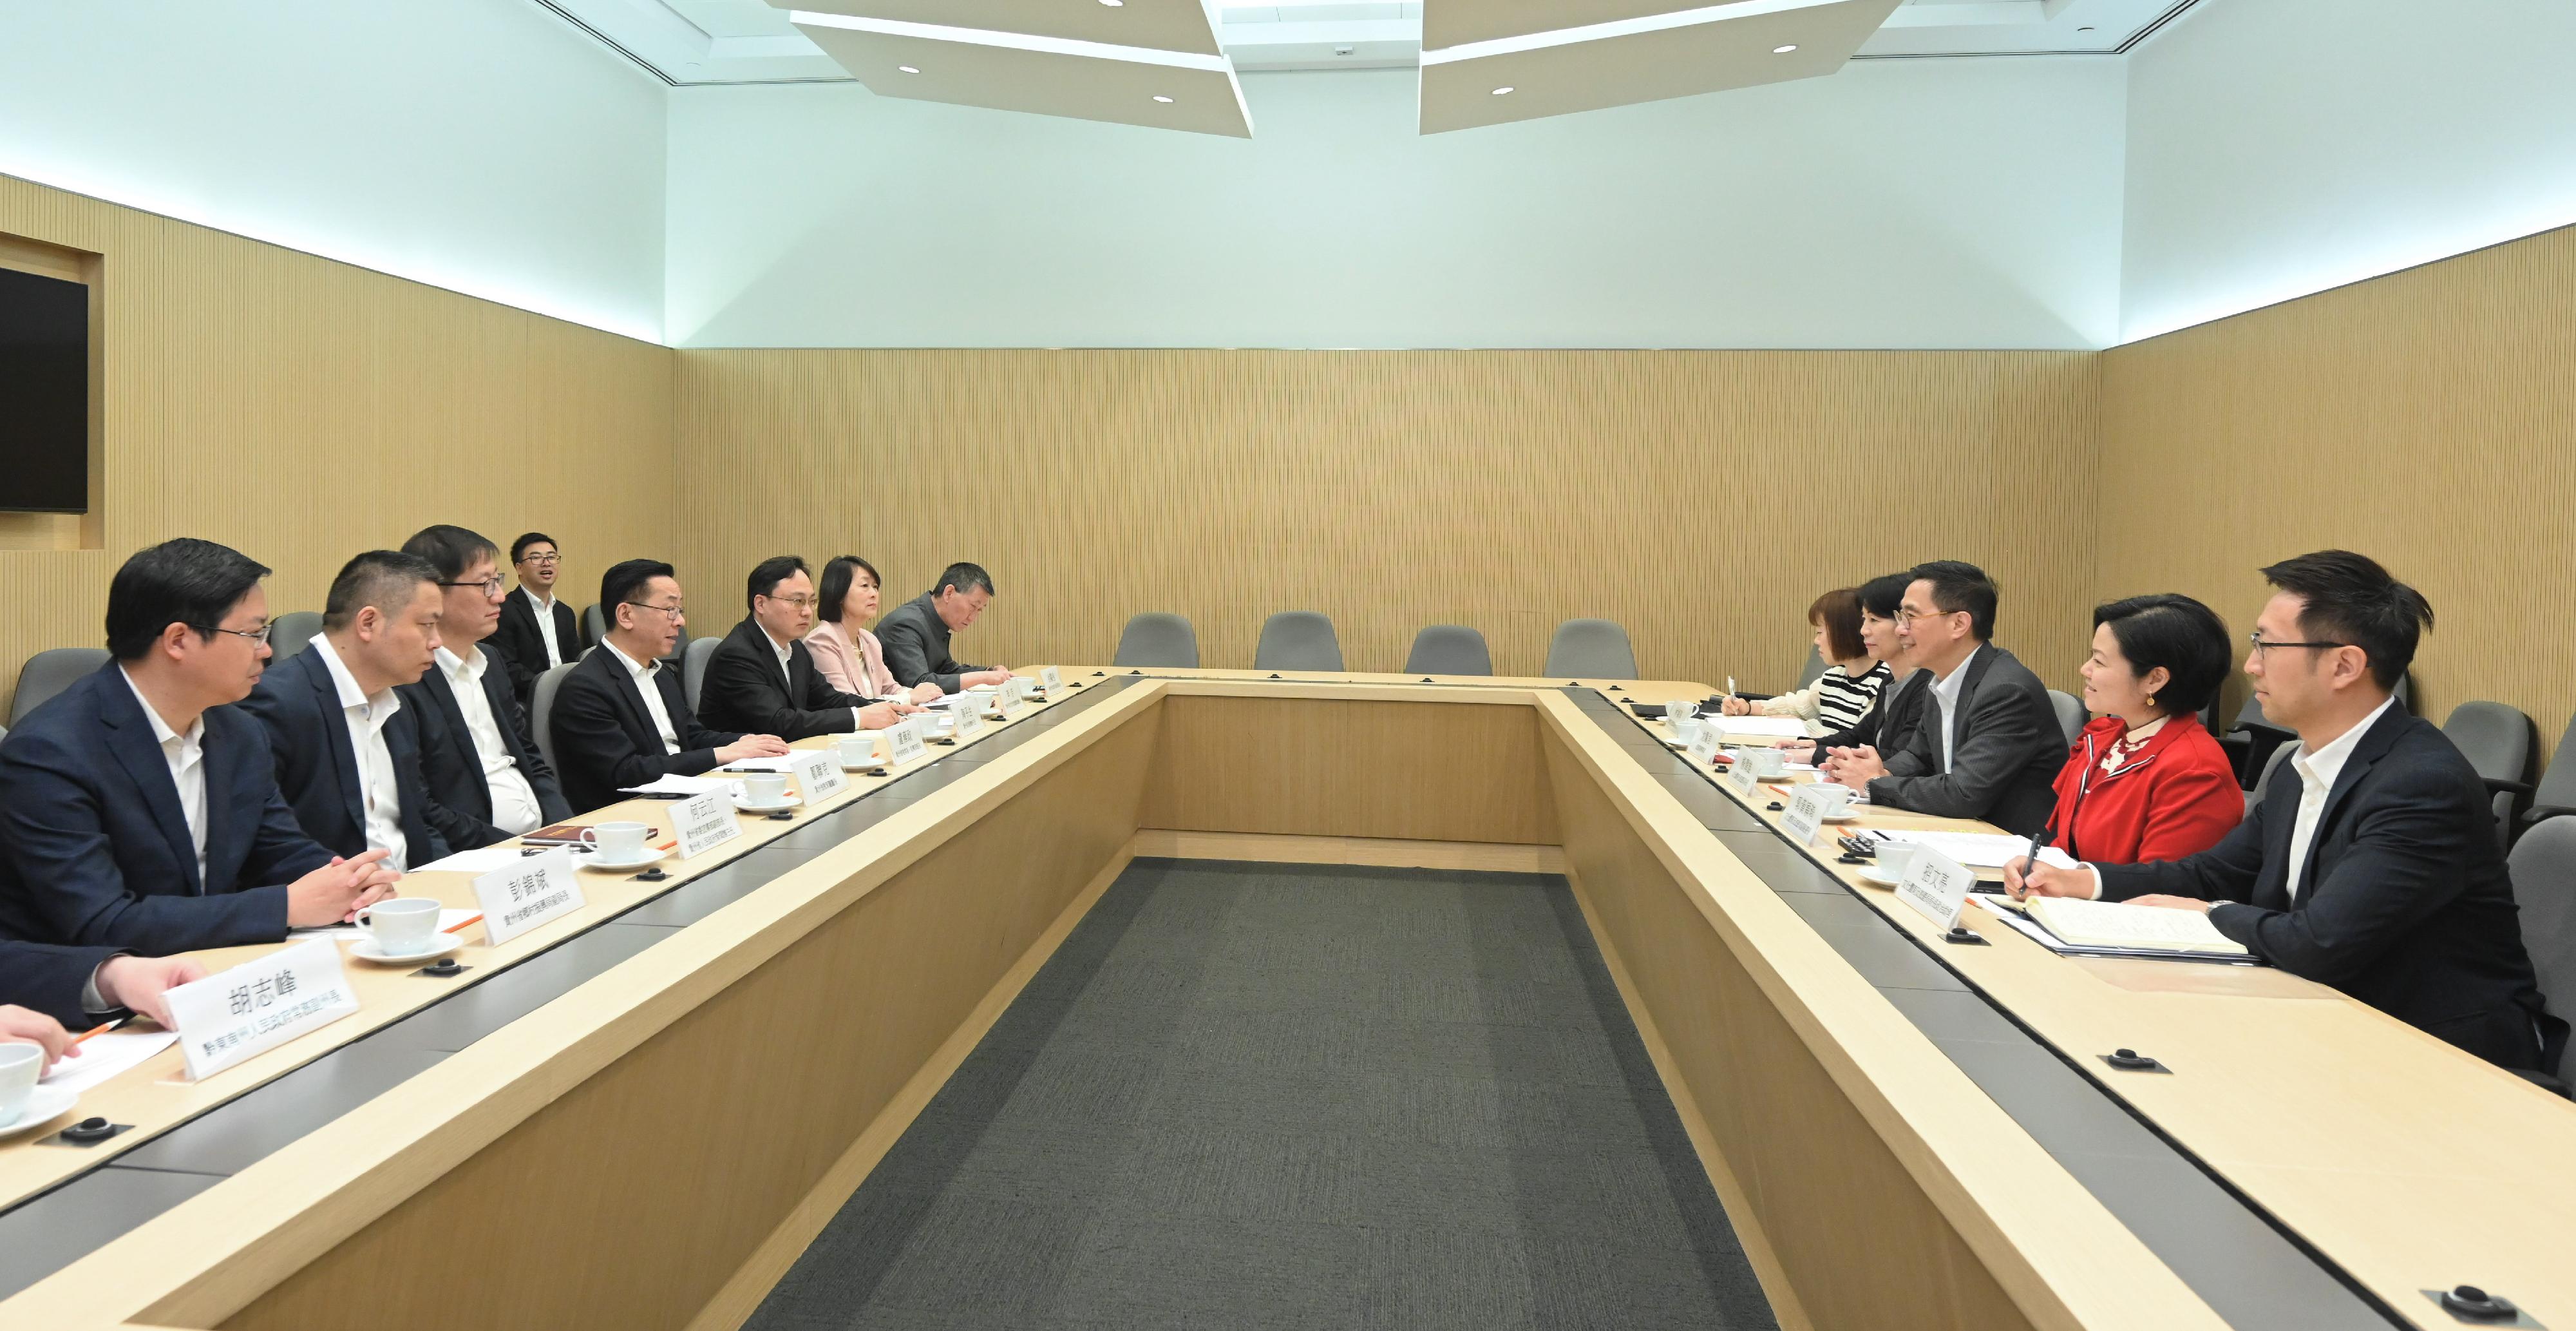 The Secretary for Culture, Sports and Tourism, Mr Kevin Yeung (third right), today (April 25) met with Member of the Standing Committee and Head of Publicity Department of the Guizhou CPC Provincial Committee, Mr Lu Yongzheng (fourth left), and the delegation. The Commissioner for Tourism, Ms Vivian Sum (fourth right), and the Deputy Secretary for Culture, Sports and Tourism, Mrs Vicki Kwok (second right), also joined the meeting.
